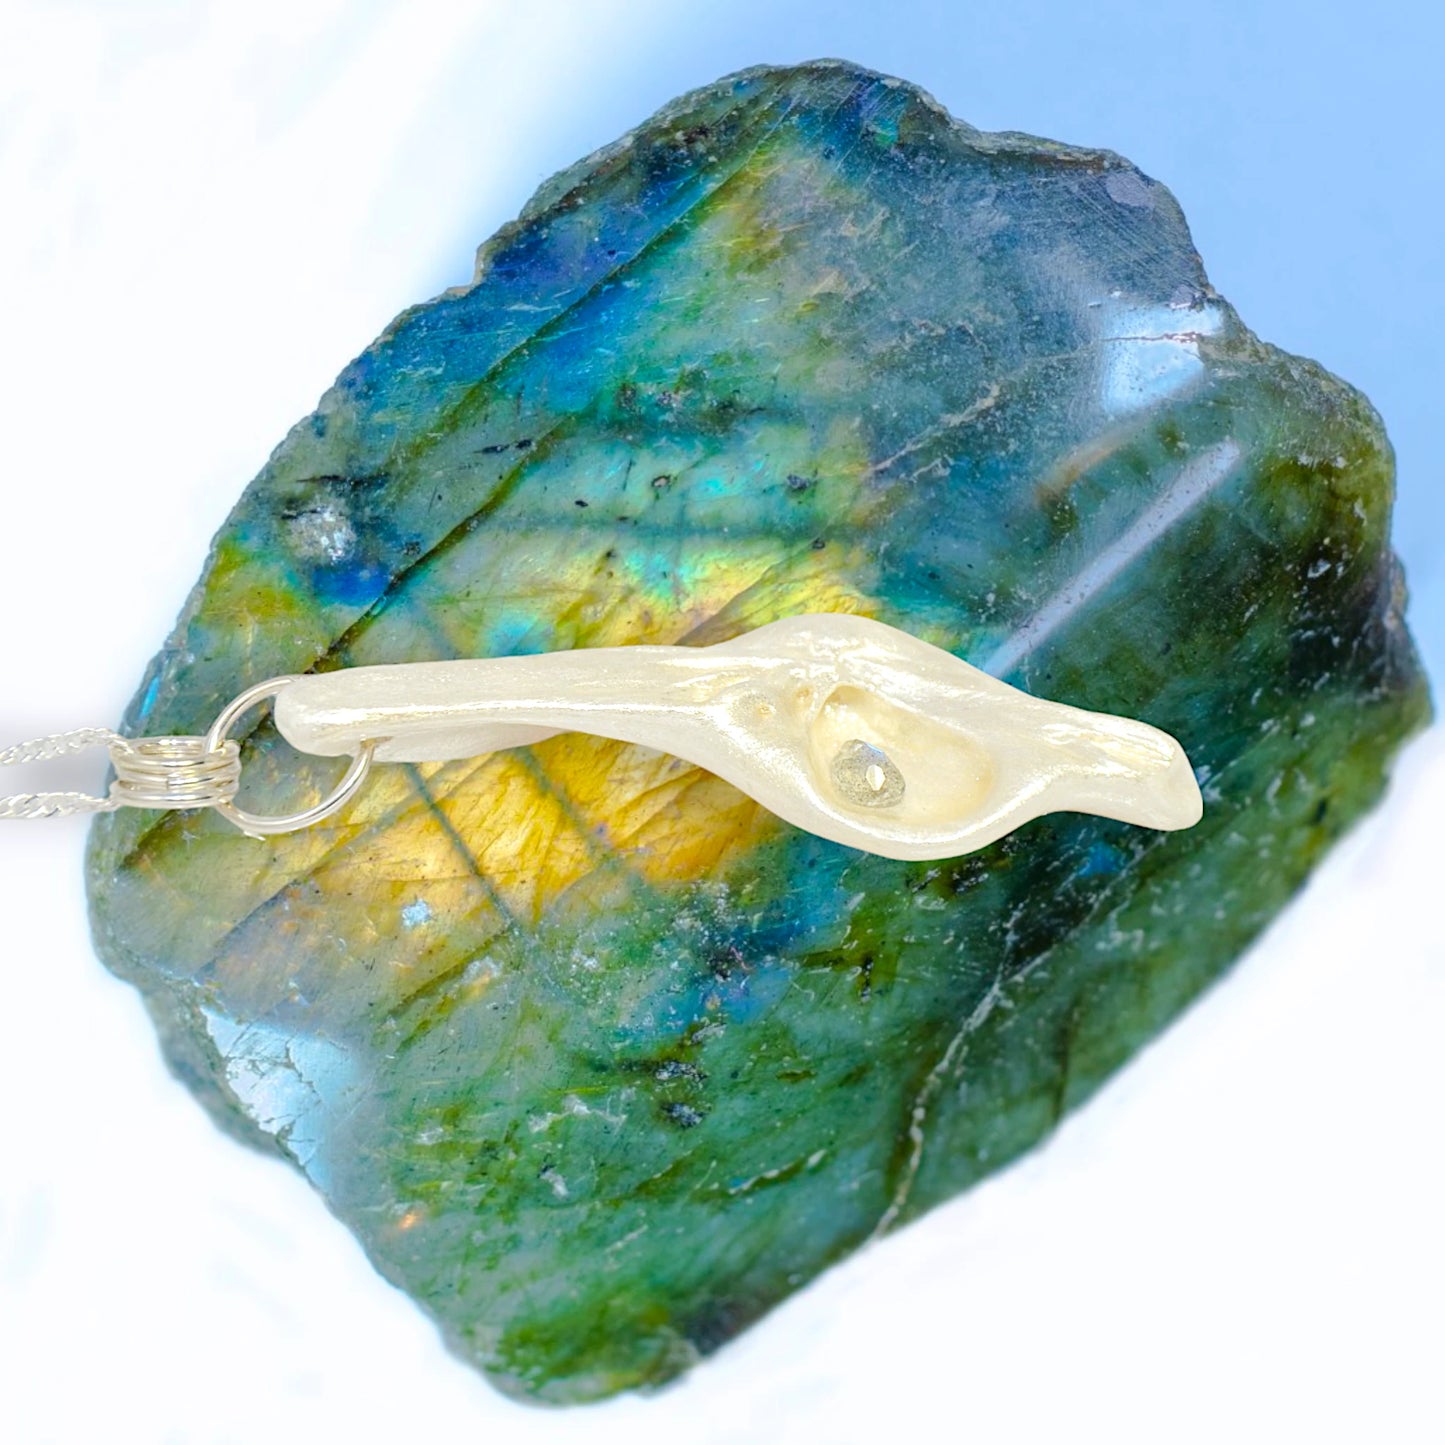 This video of Cool Summer pendant made of natural seashell with a tear drop shape rose cut labradorite gemstone.  The pendant is shown resting on a large piece of labradorite.